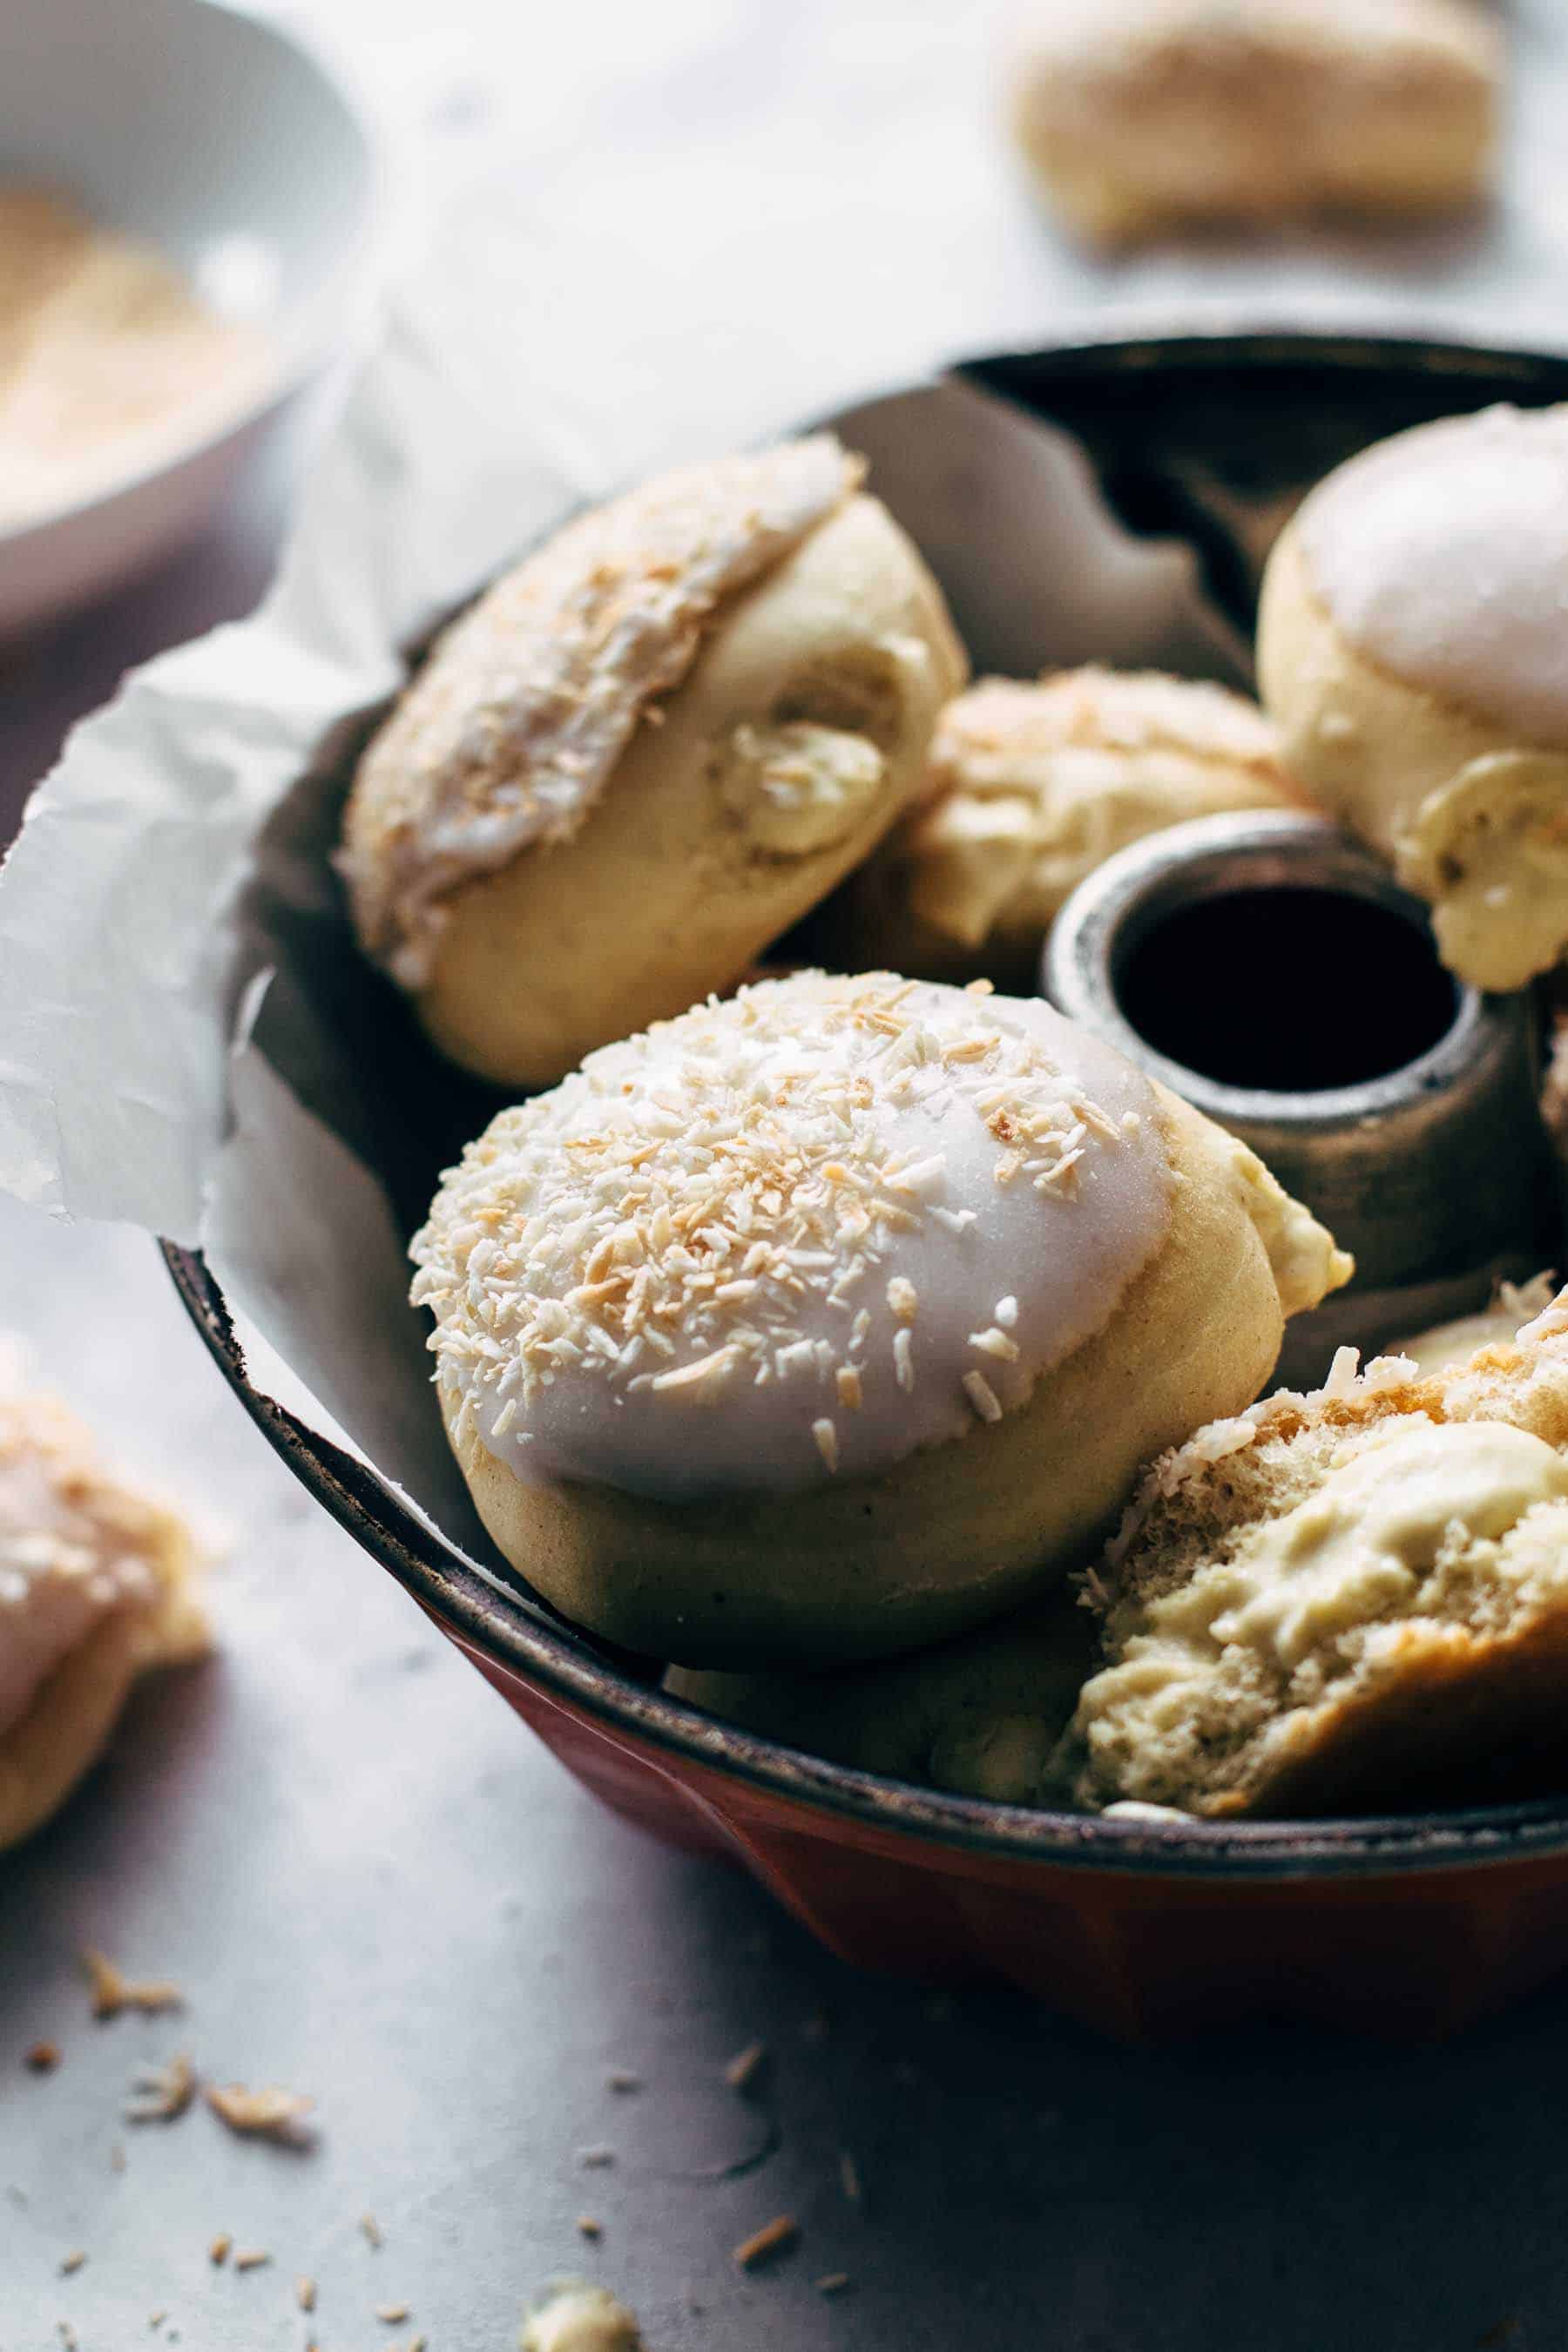 Coconut Cream filled Baked Yeast Donuts Recipe